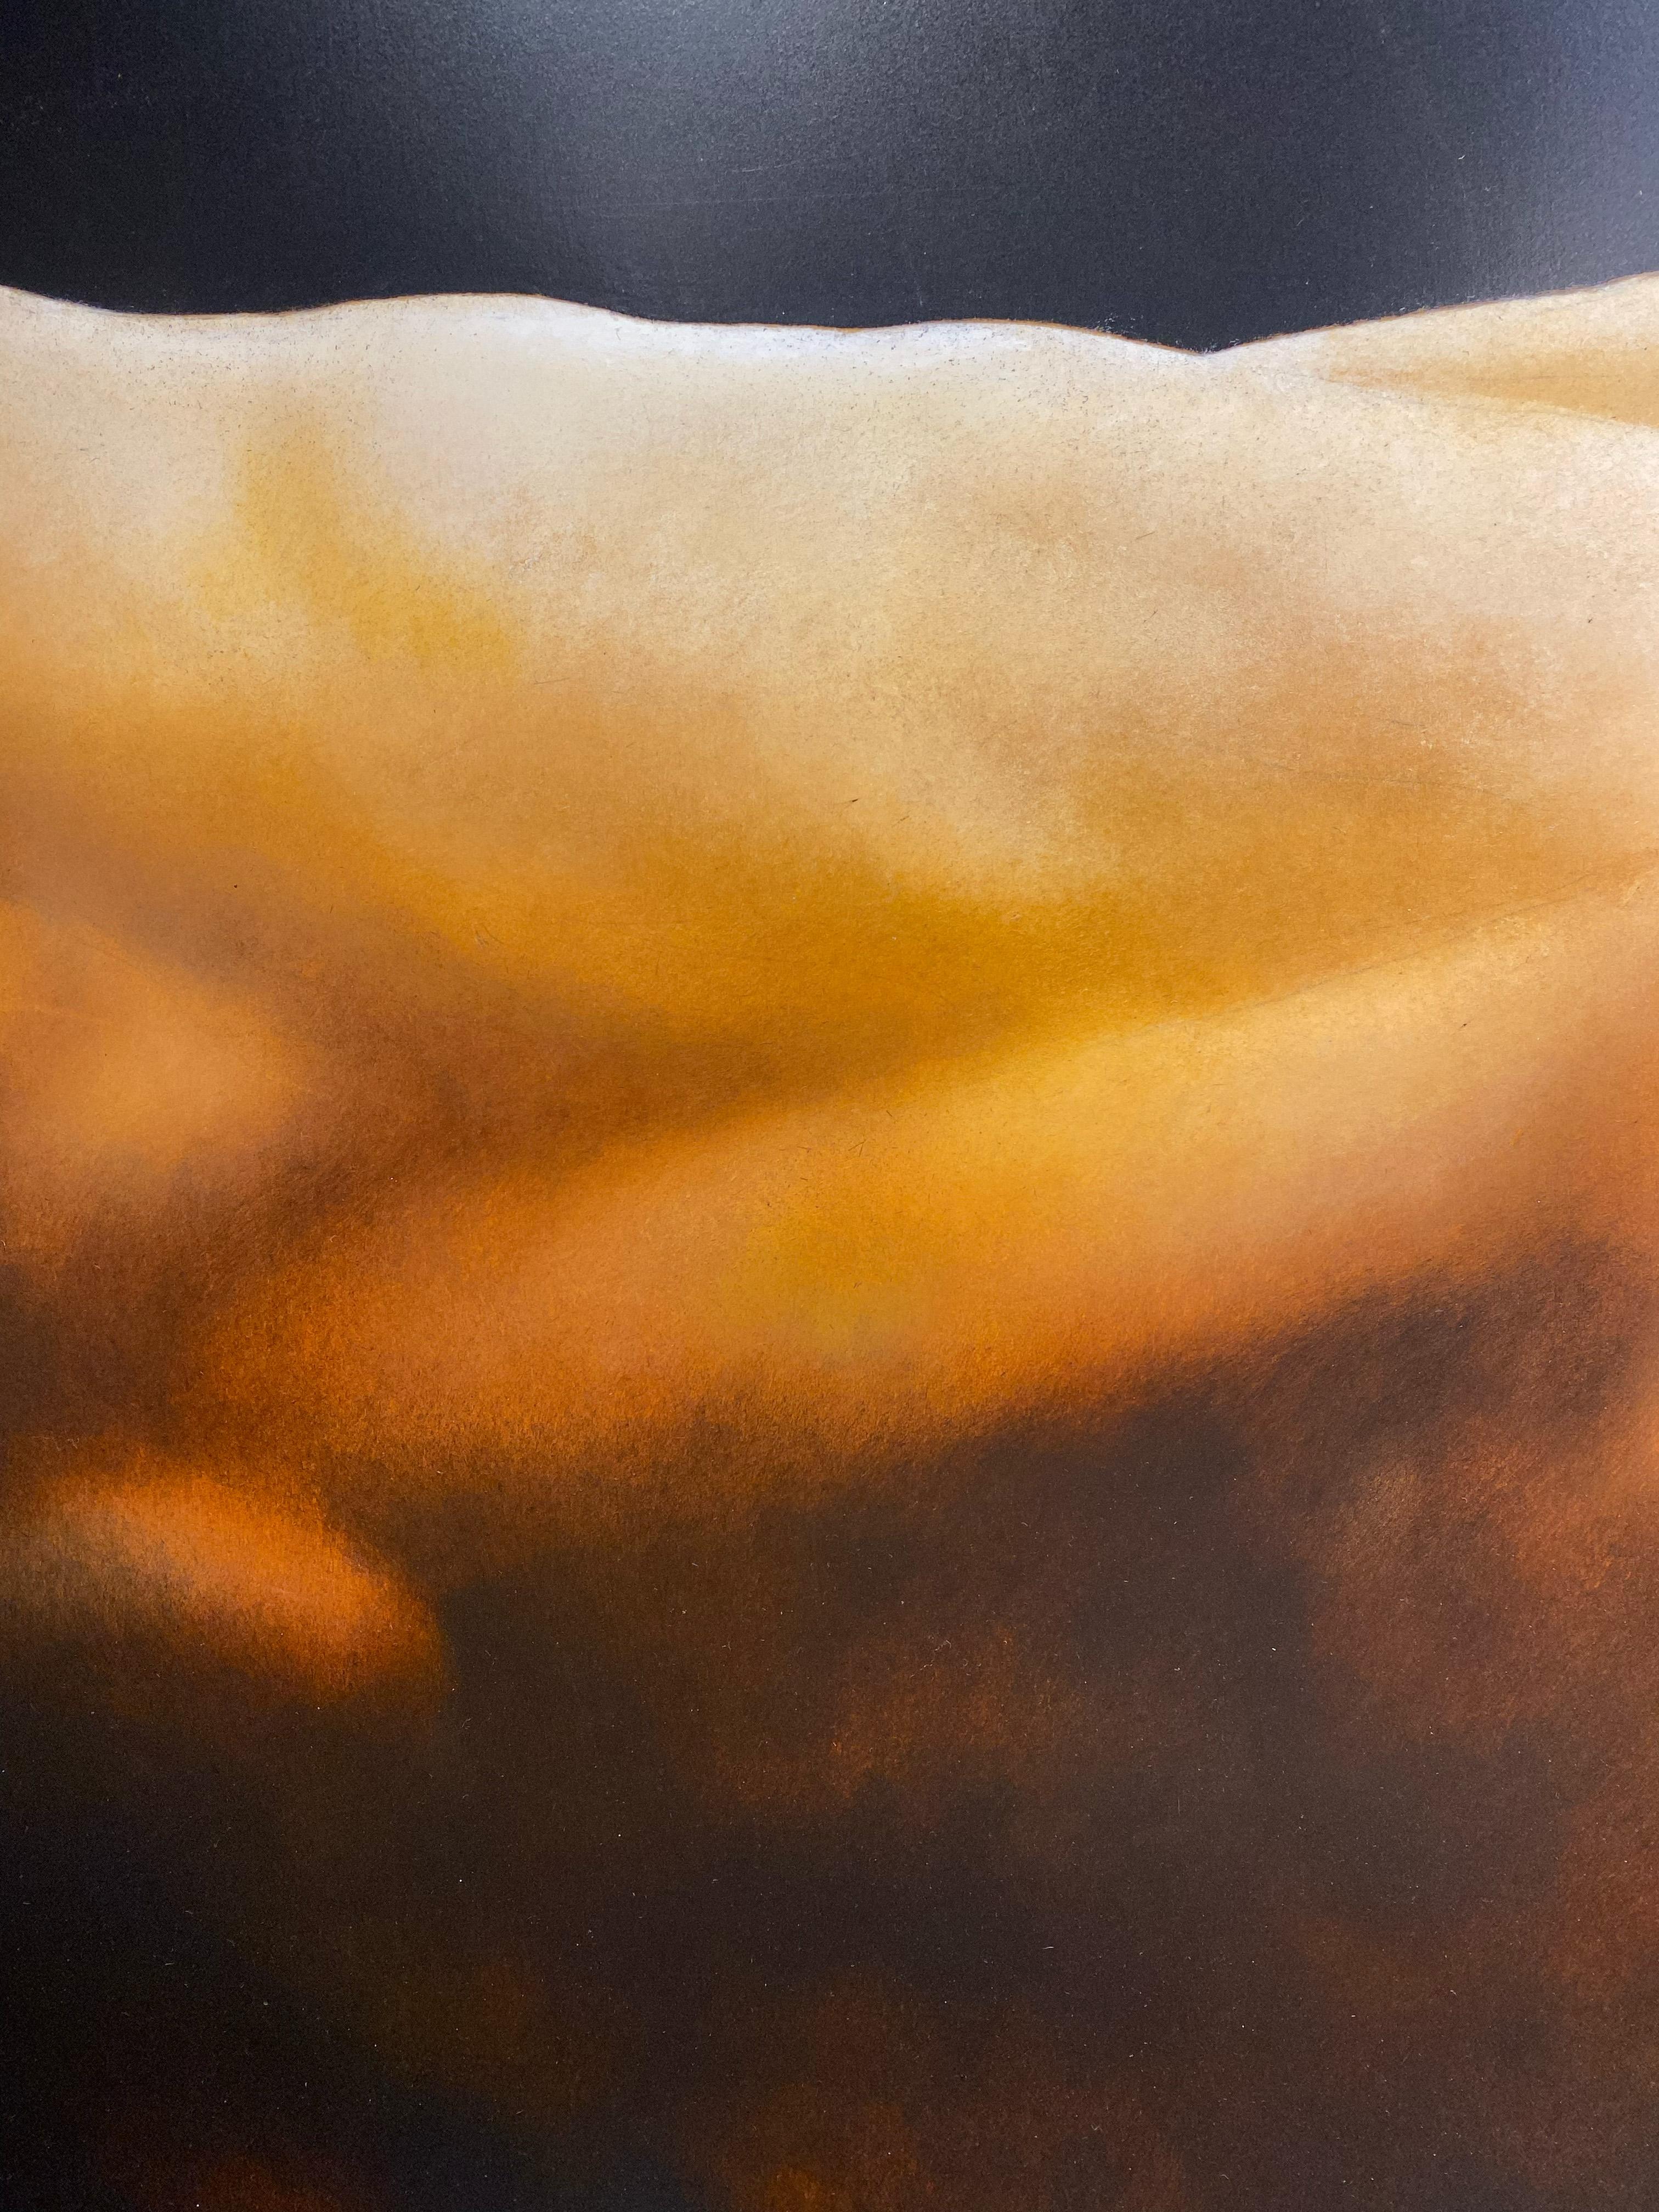 Through this artwork the artist achieves to decontextualize the subject and give it an entirely new meaning. By comparing the subject to the likeness of nature itself, the warm tones and smooth textures resemble that of a dune. Throughout this